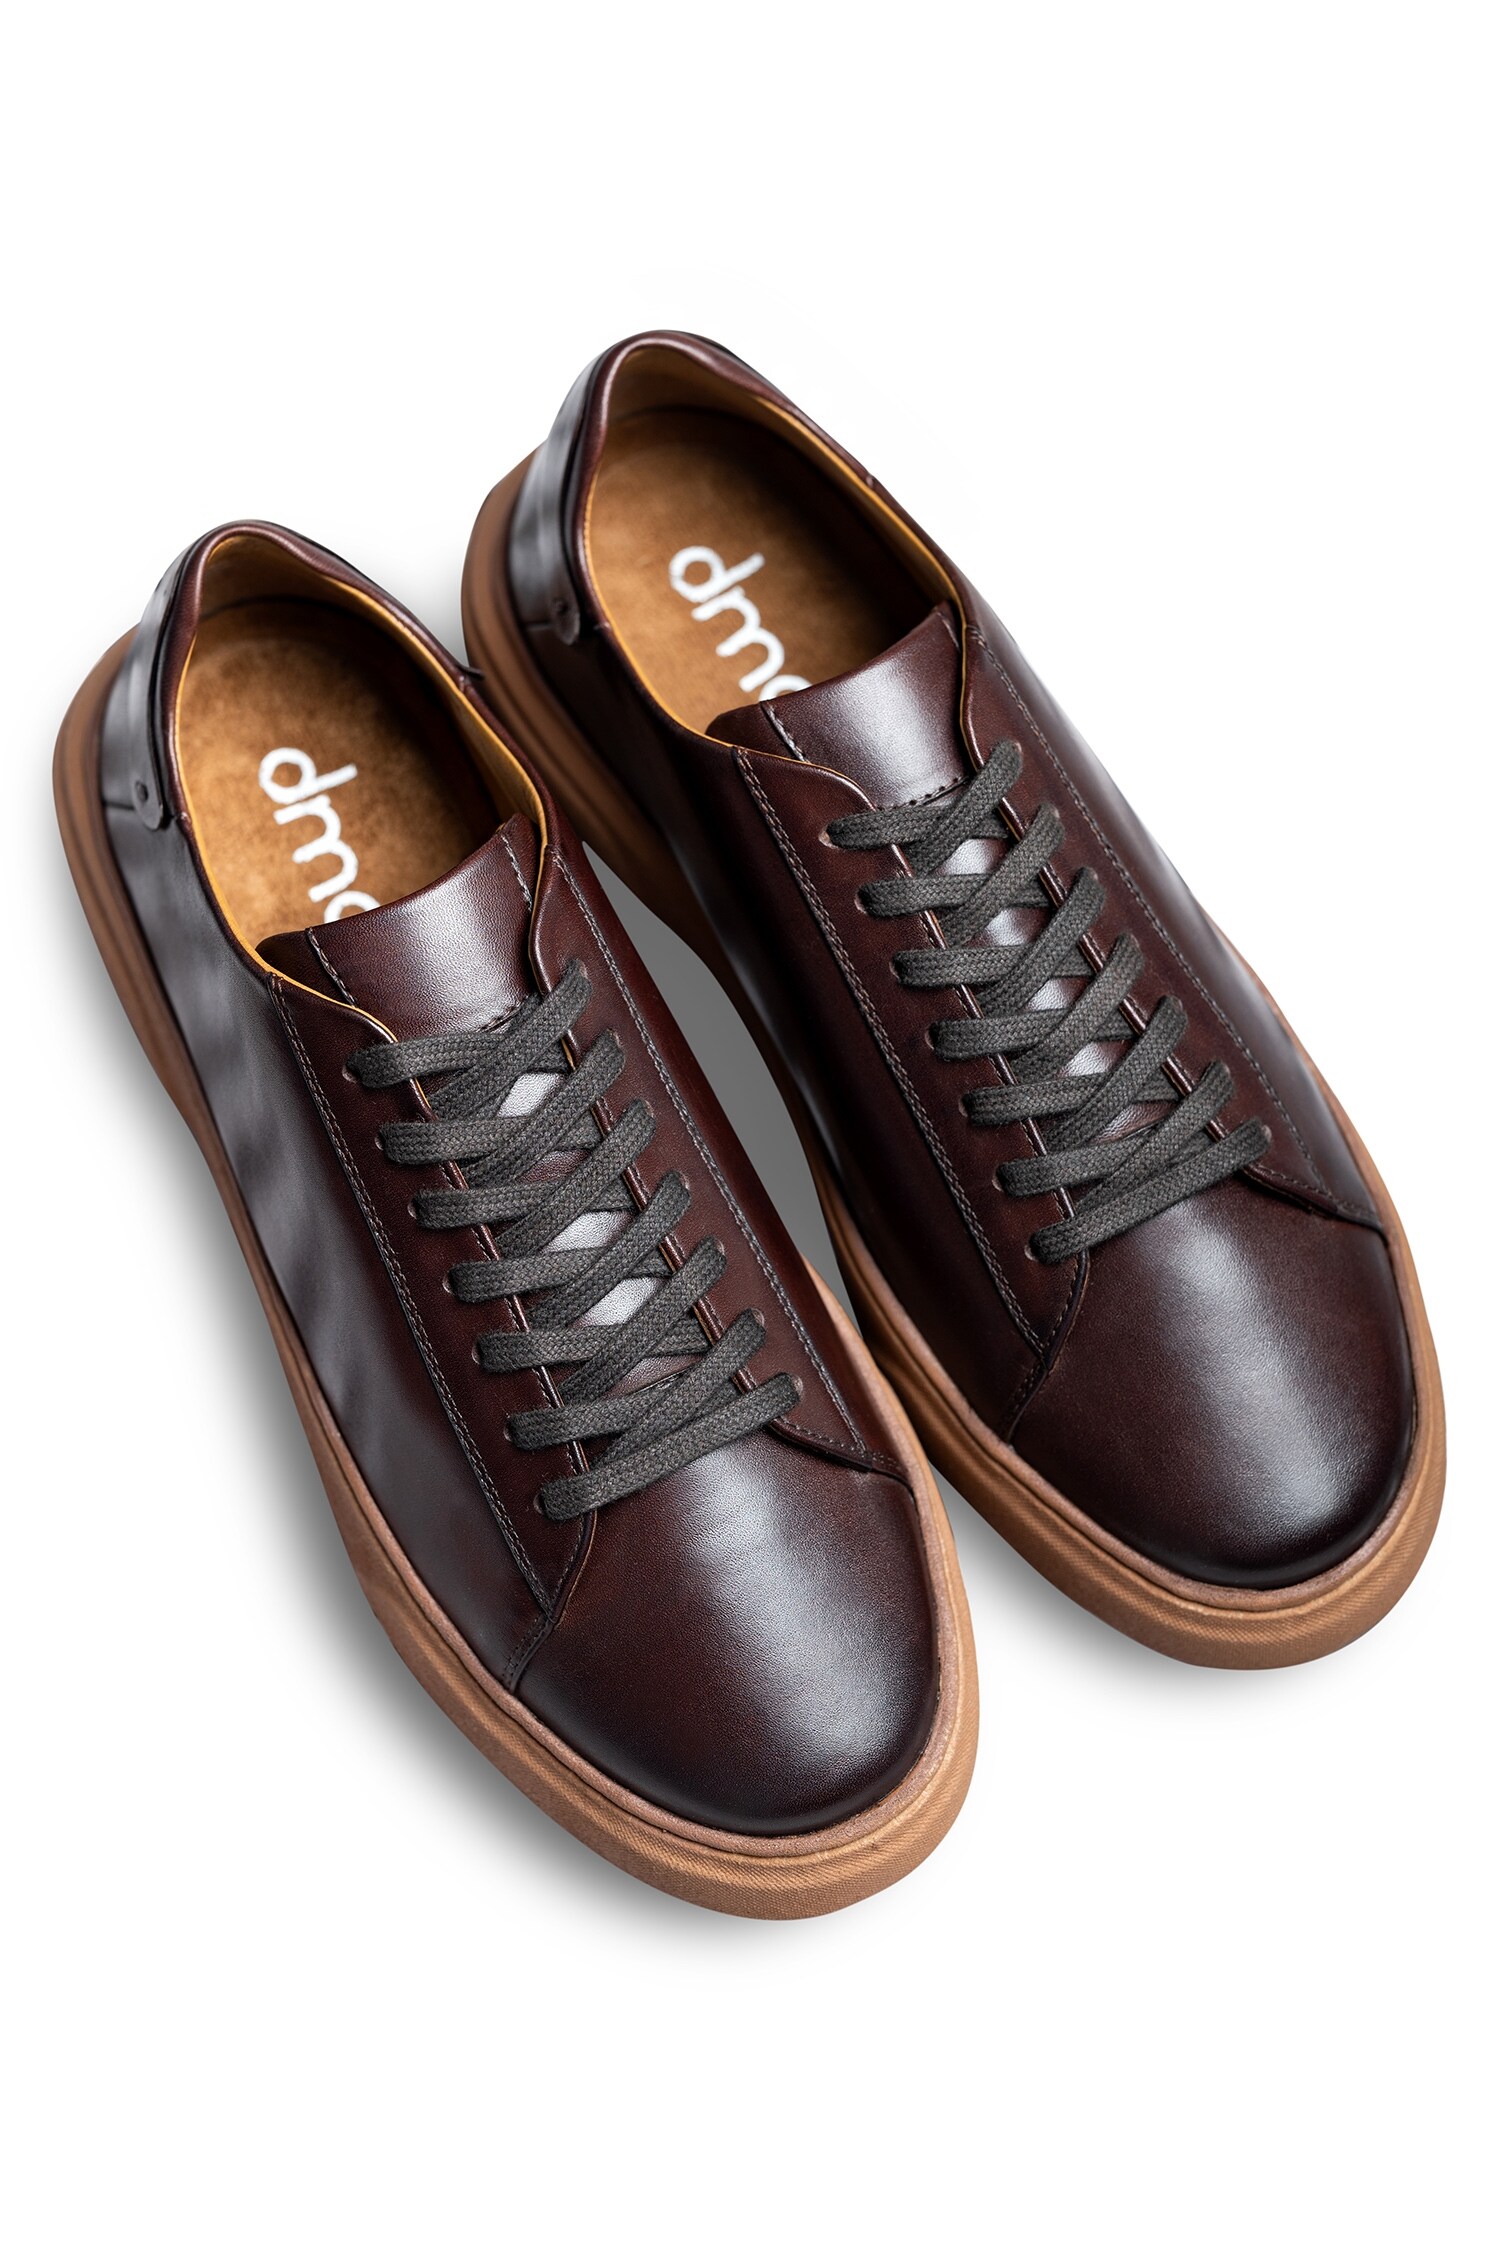 Dmodot Brown Upper Material Scuro Marrone Leather Sneakers